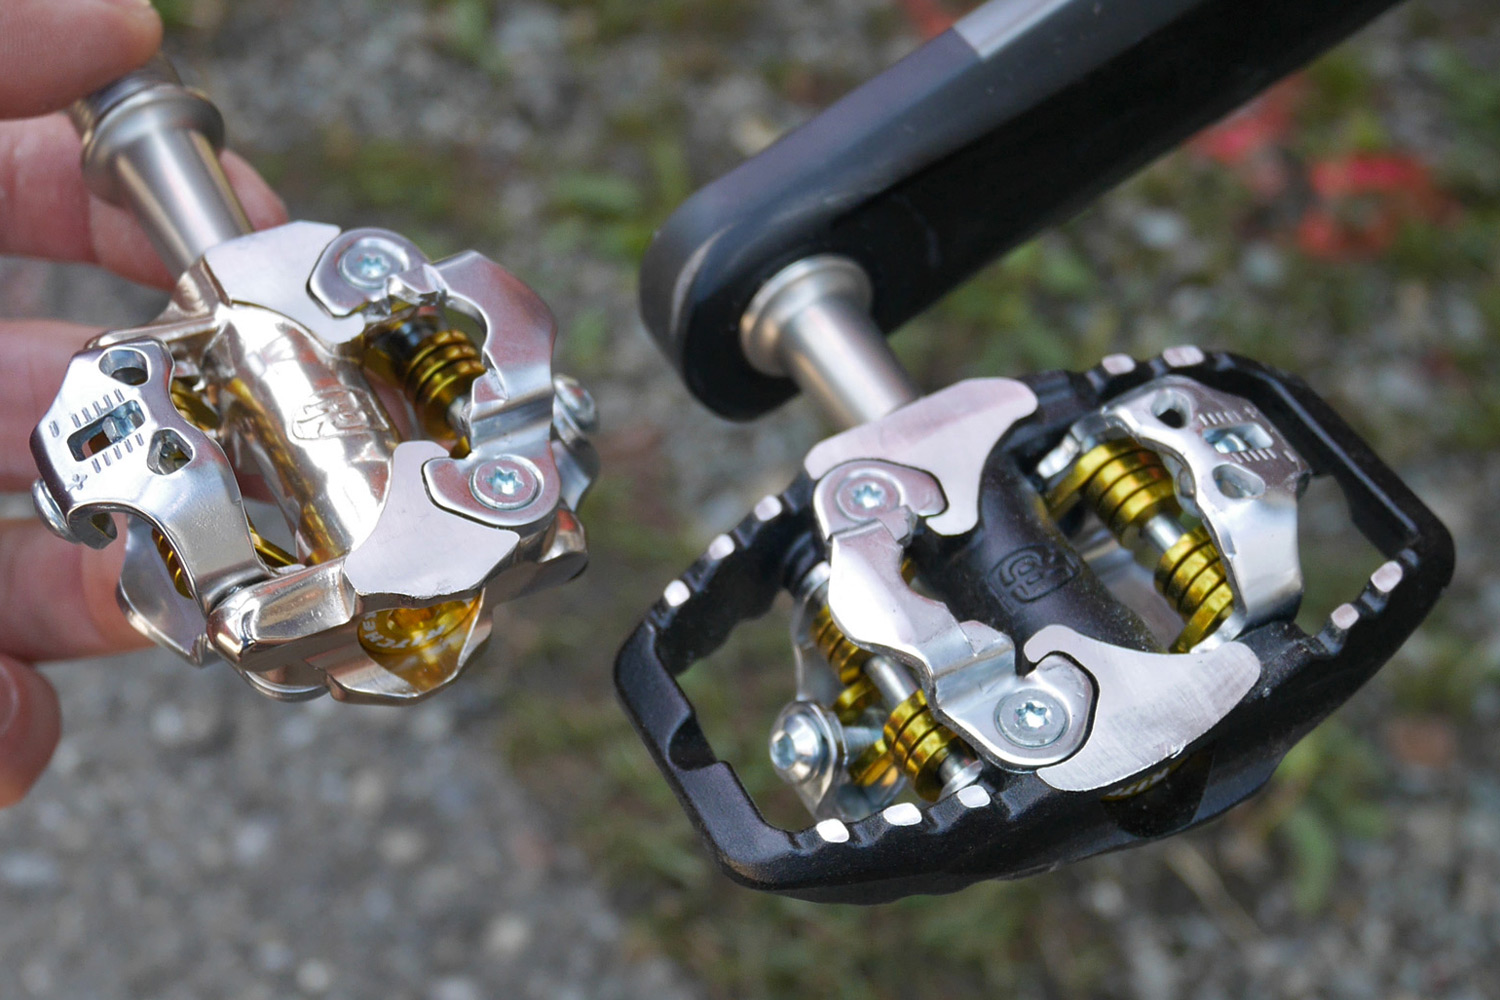 ritchey clipless pedals